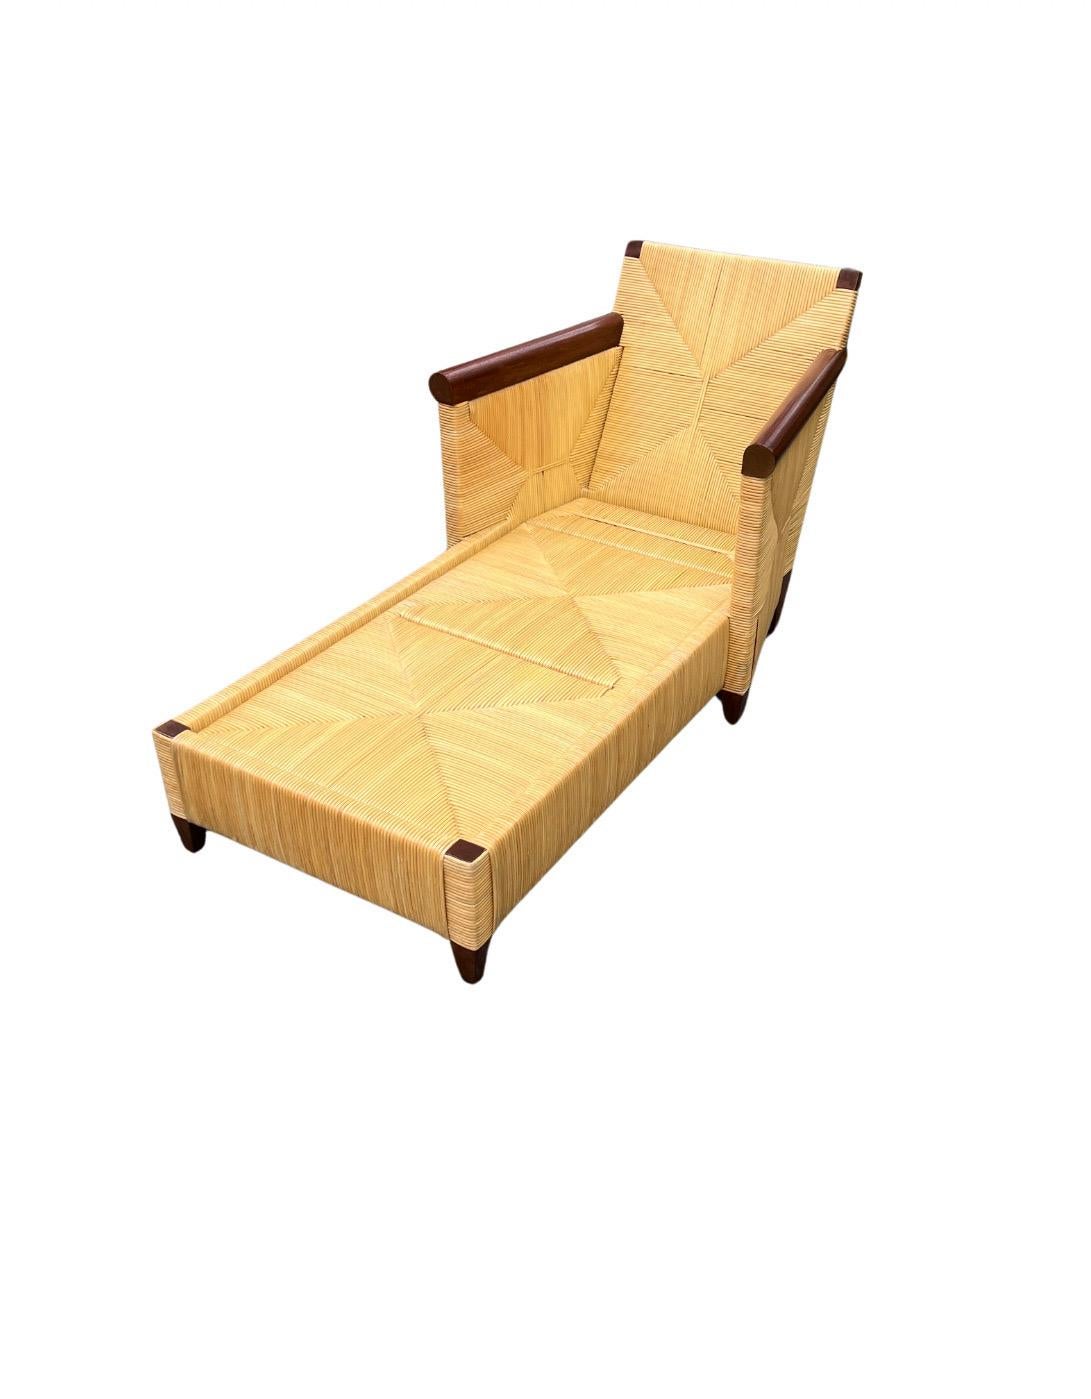 Sophisticated Restored Rush Cane Chaise Lounge by John Hutton for Donghia For Sale 12